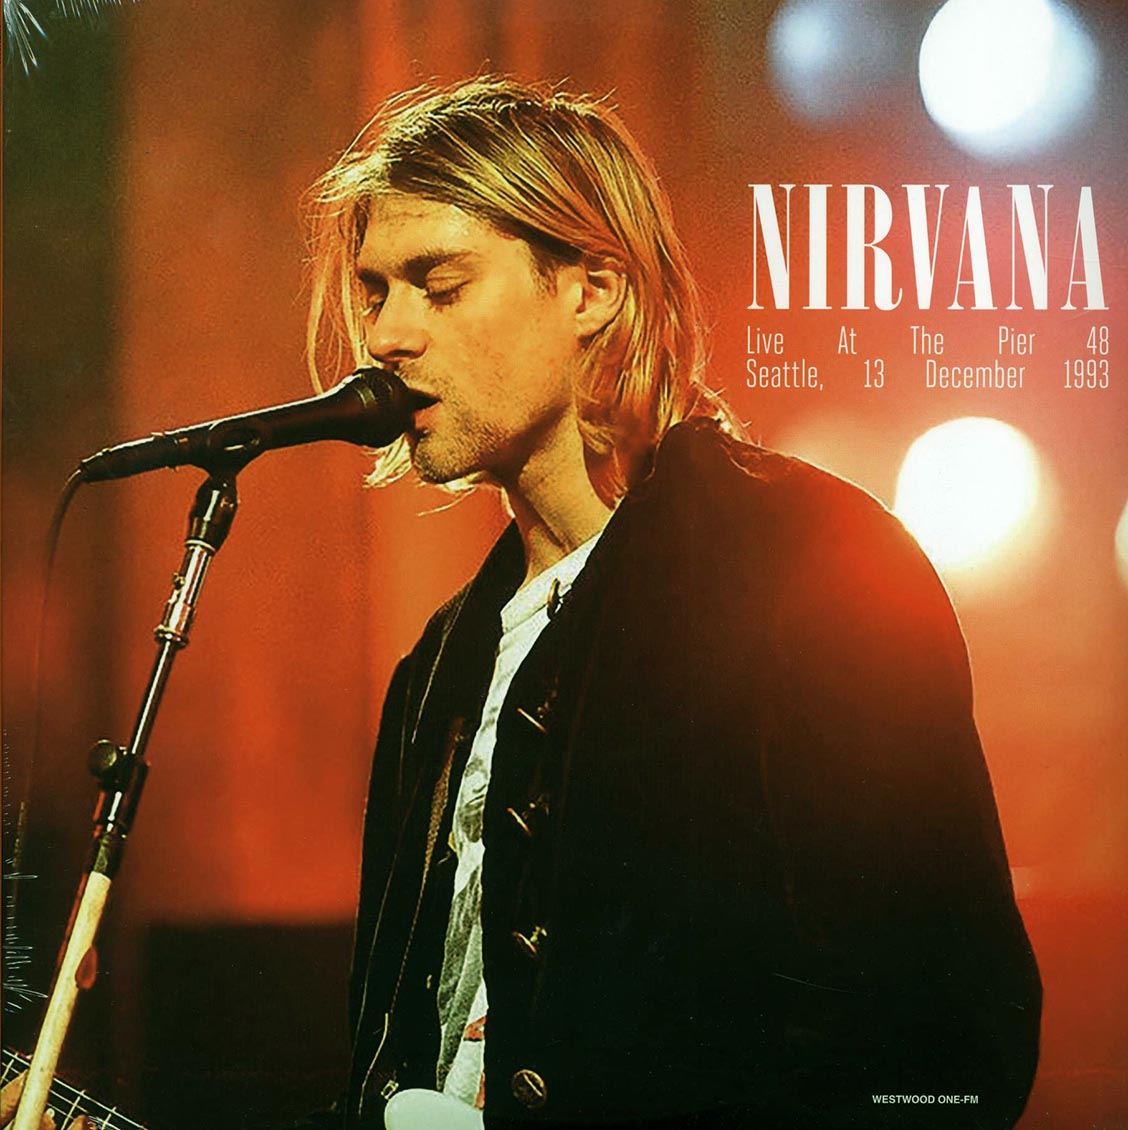 Nirvana - Live At The Pier 48 Seattle, 13 December 1993